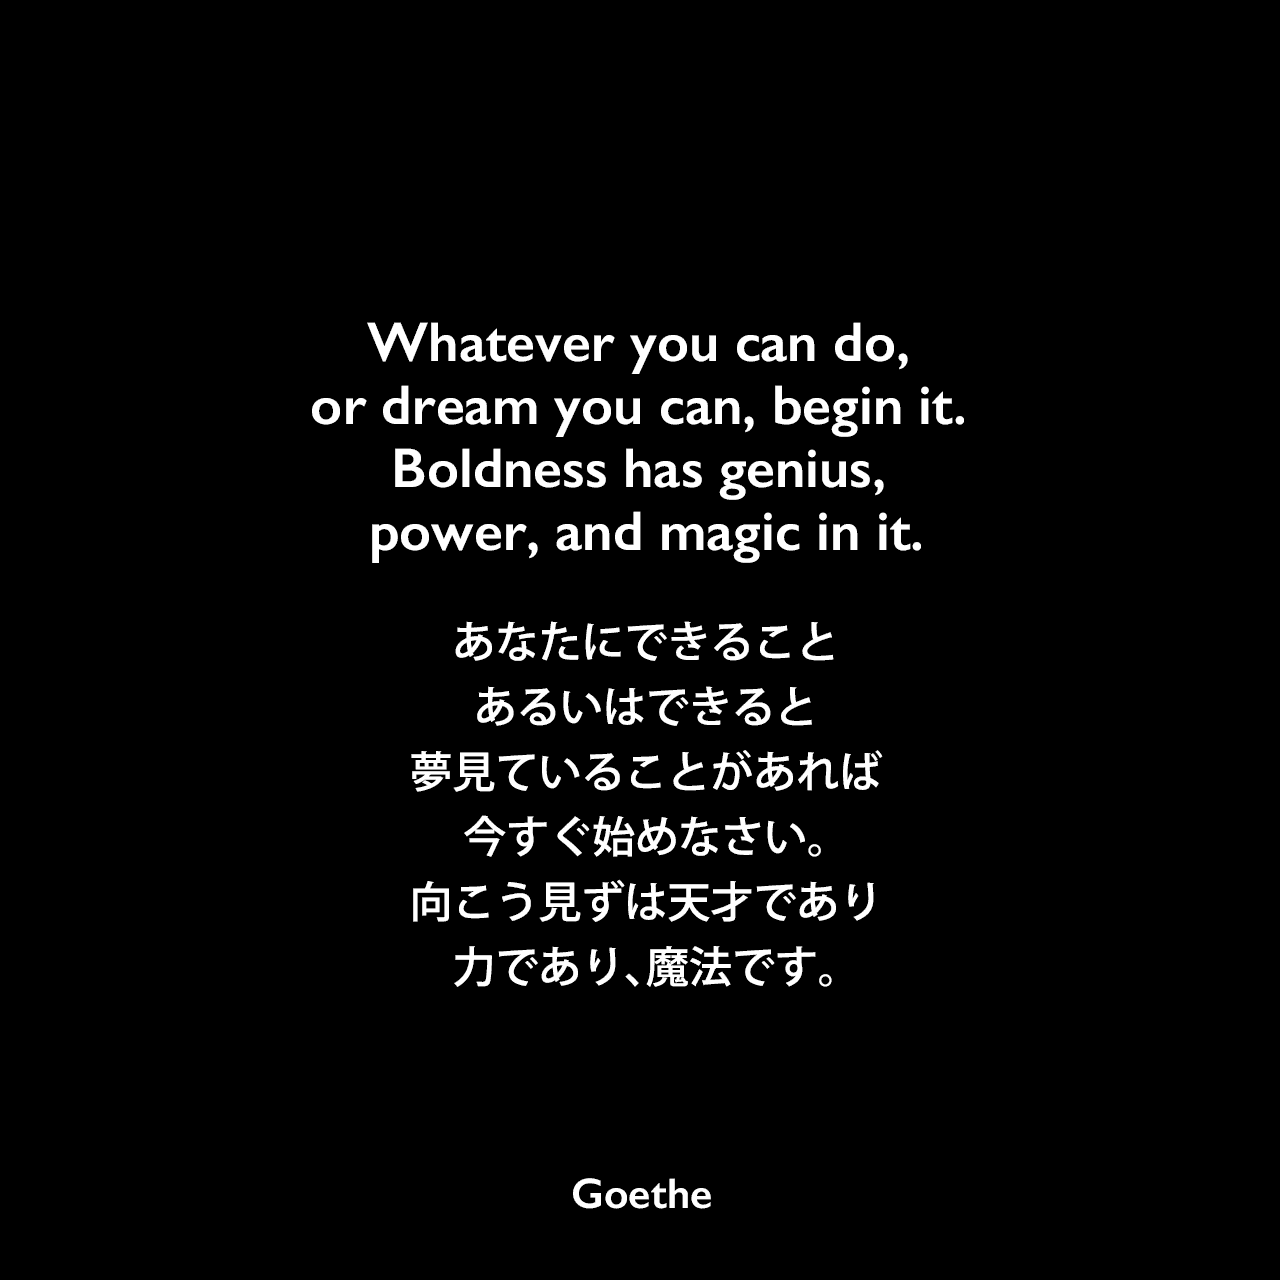 Whatever you can do, or dream you can, begin it. Boldness has genius, power, and magic in it.あなたにできること、あるいはできると夢見ていることがあれば、今すぐ始めなさい。向こう見ずは天才であり、力であり、魔法です。Johann Wolfgang von Goethe